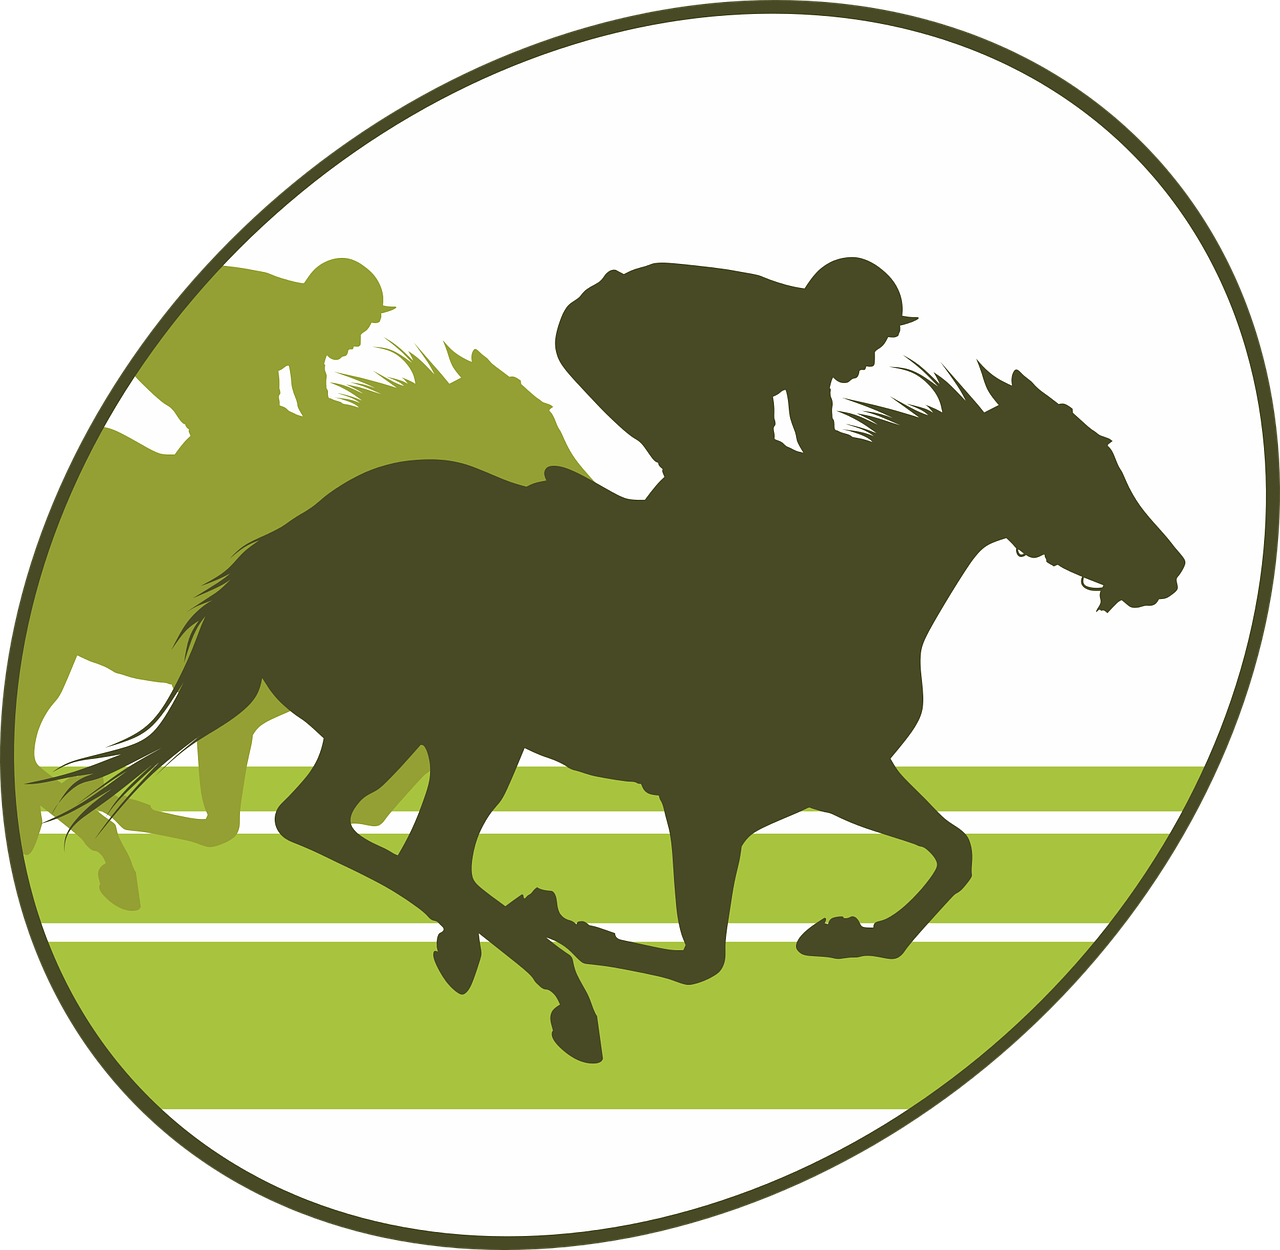 Pulled Up Meaning – What Does Pulled Up Mean In Horse Racing?